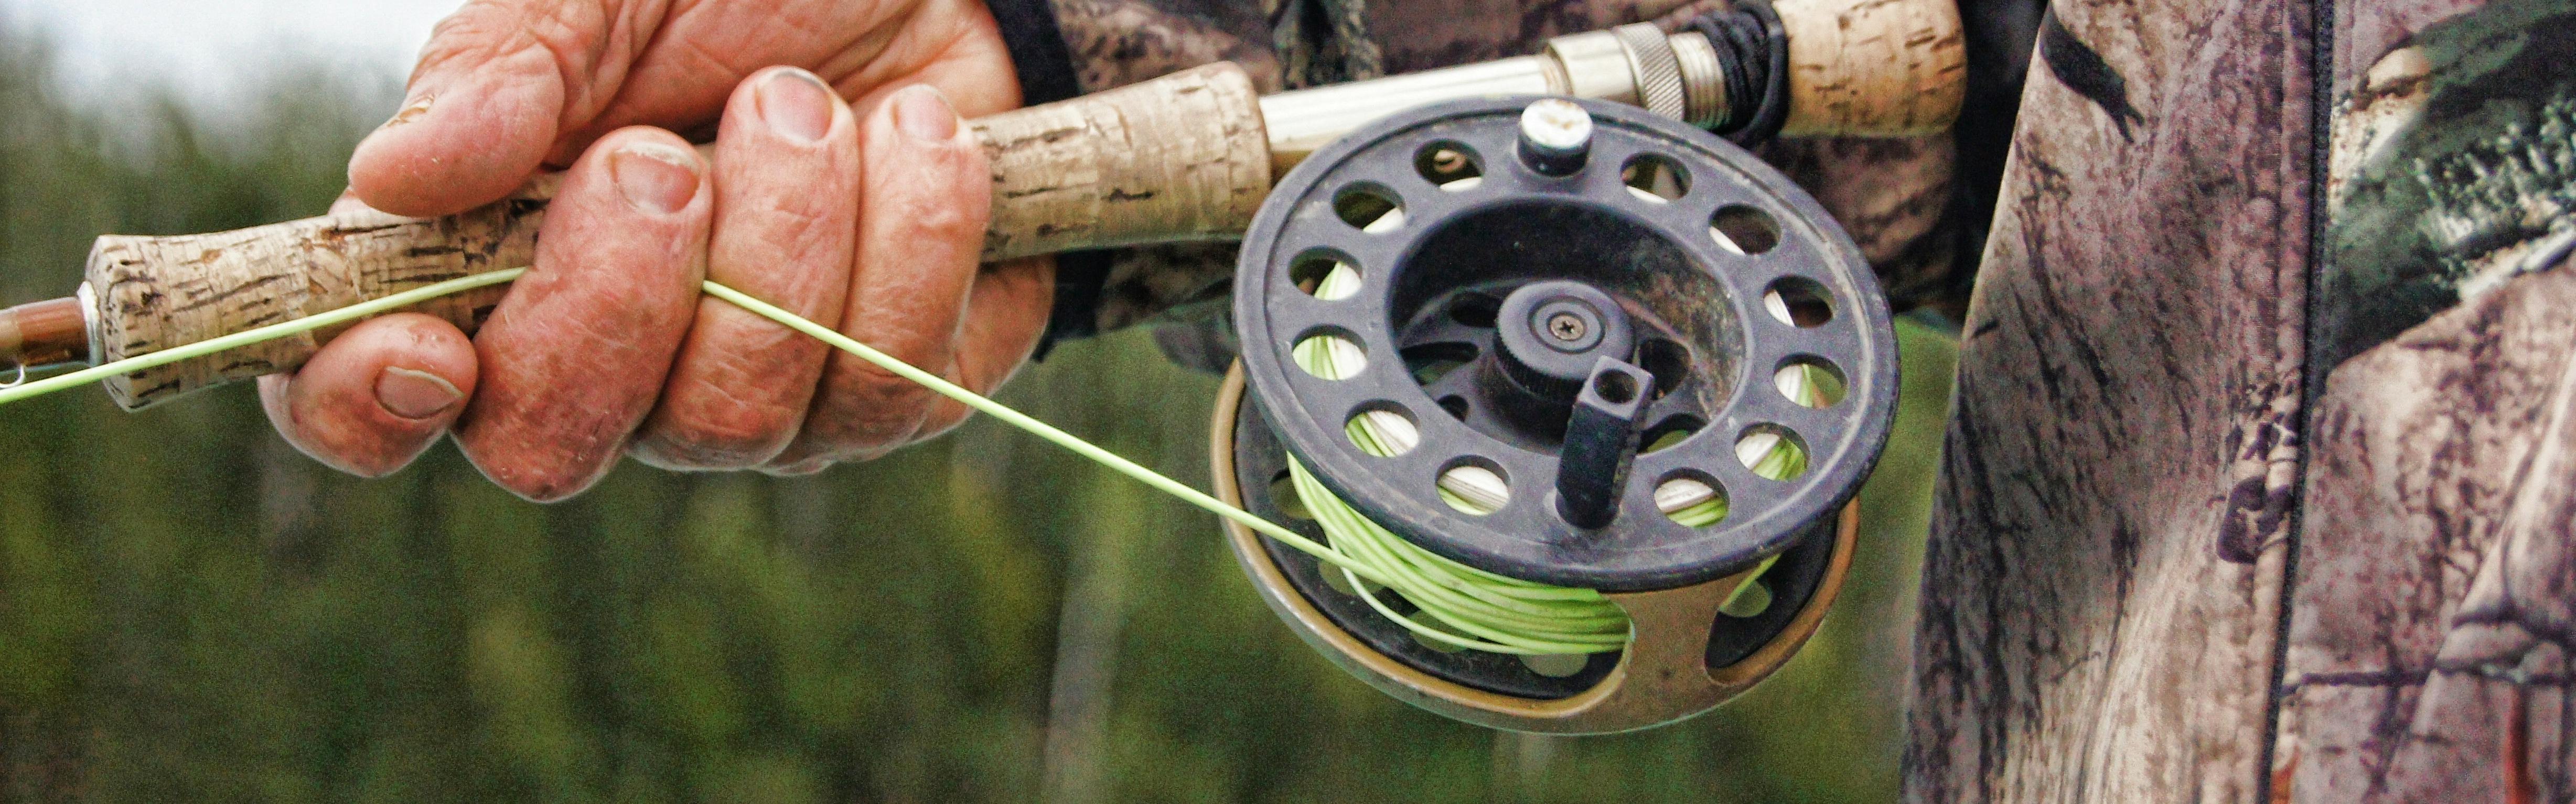  Semi-Automatic Fly Fishing Reel CNC Machined Aluminum with  Drag Adjustment for Freshwater Lake River Trout Fishing : Sports & Outdoors